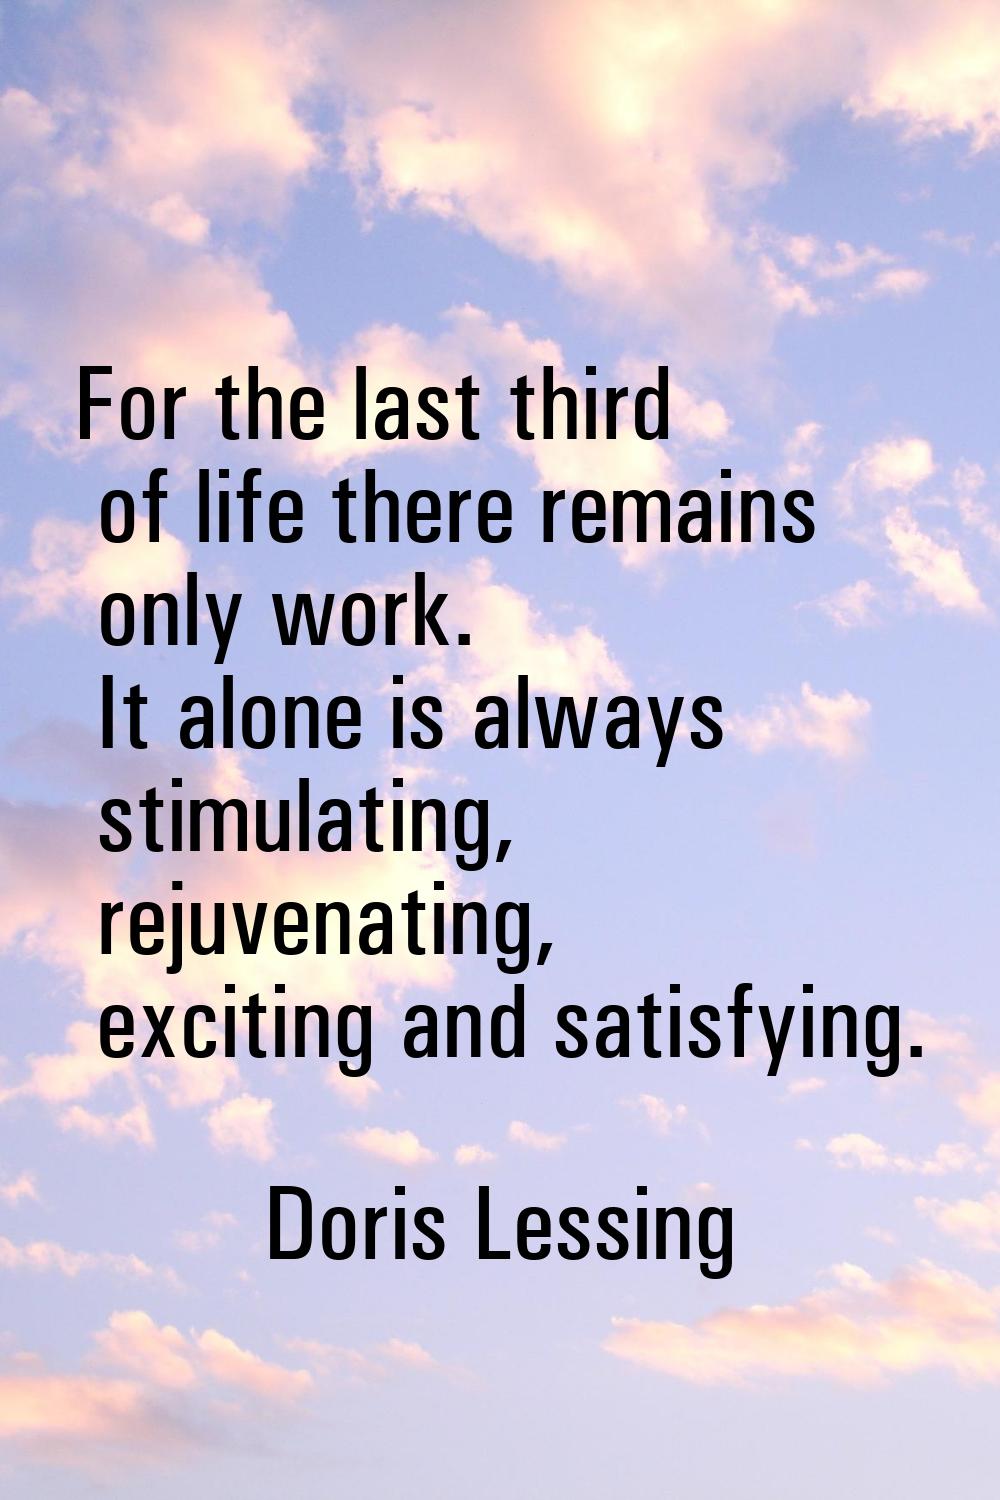 For the last third of life there remains only work. It alone is always stimulating, rejuvenating, e